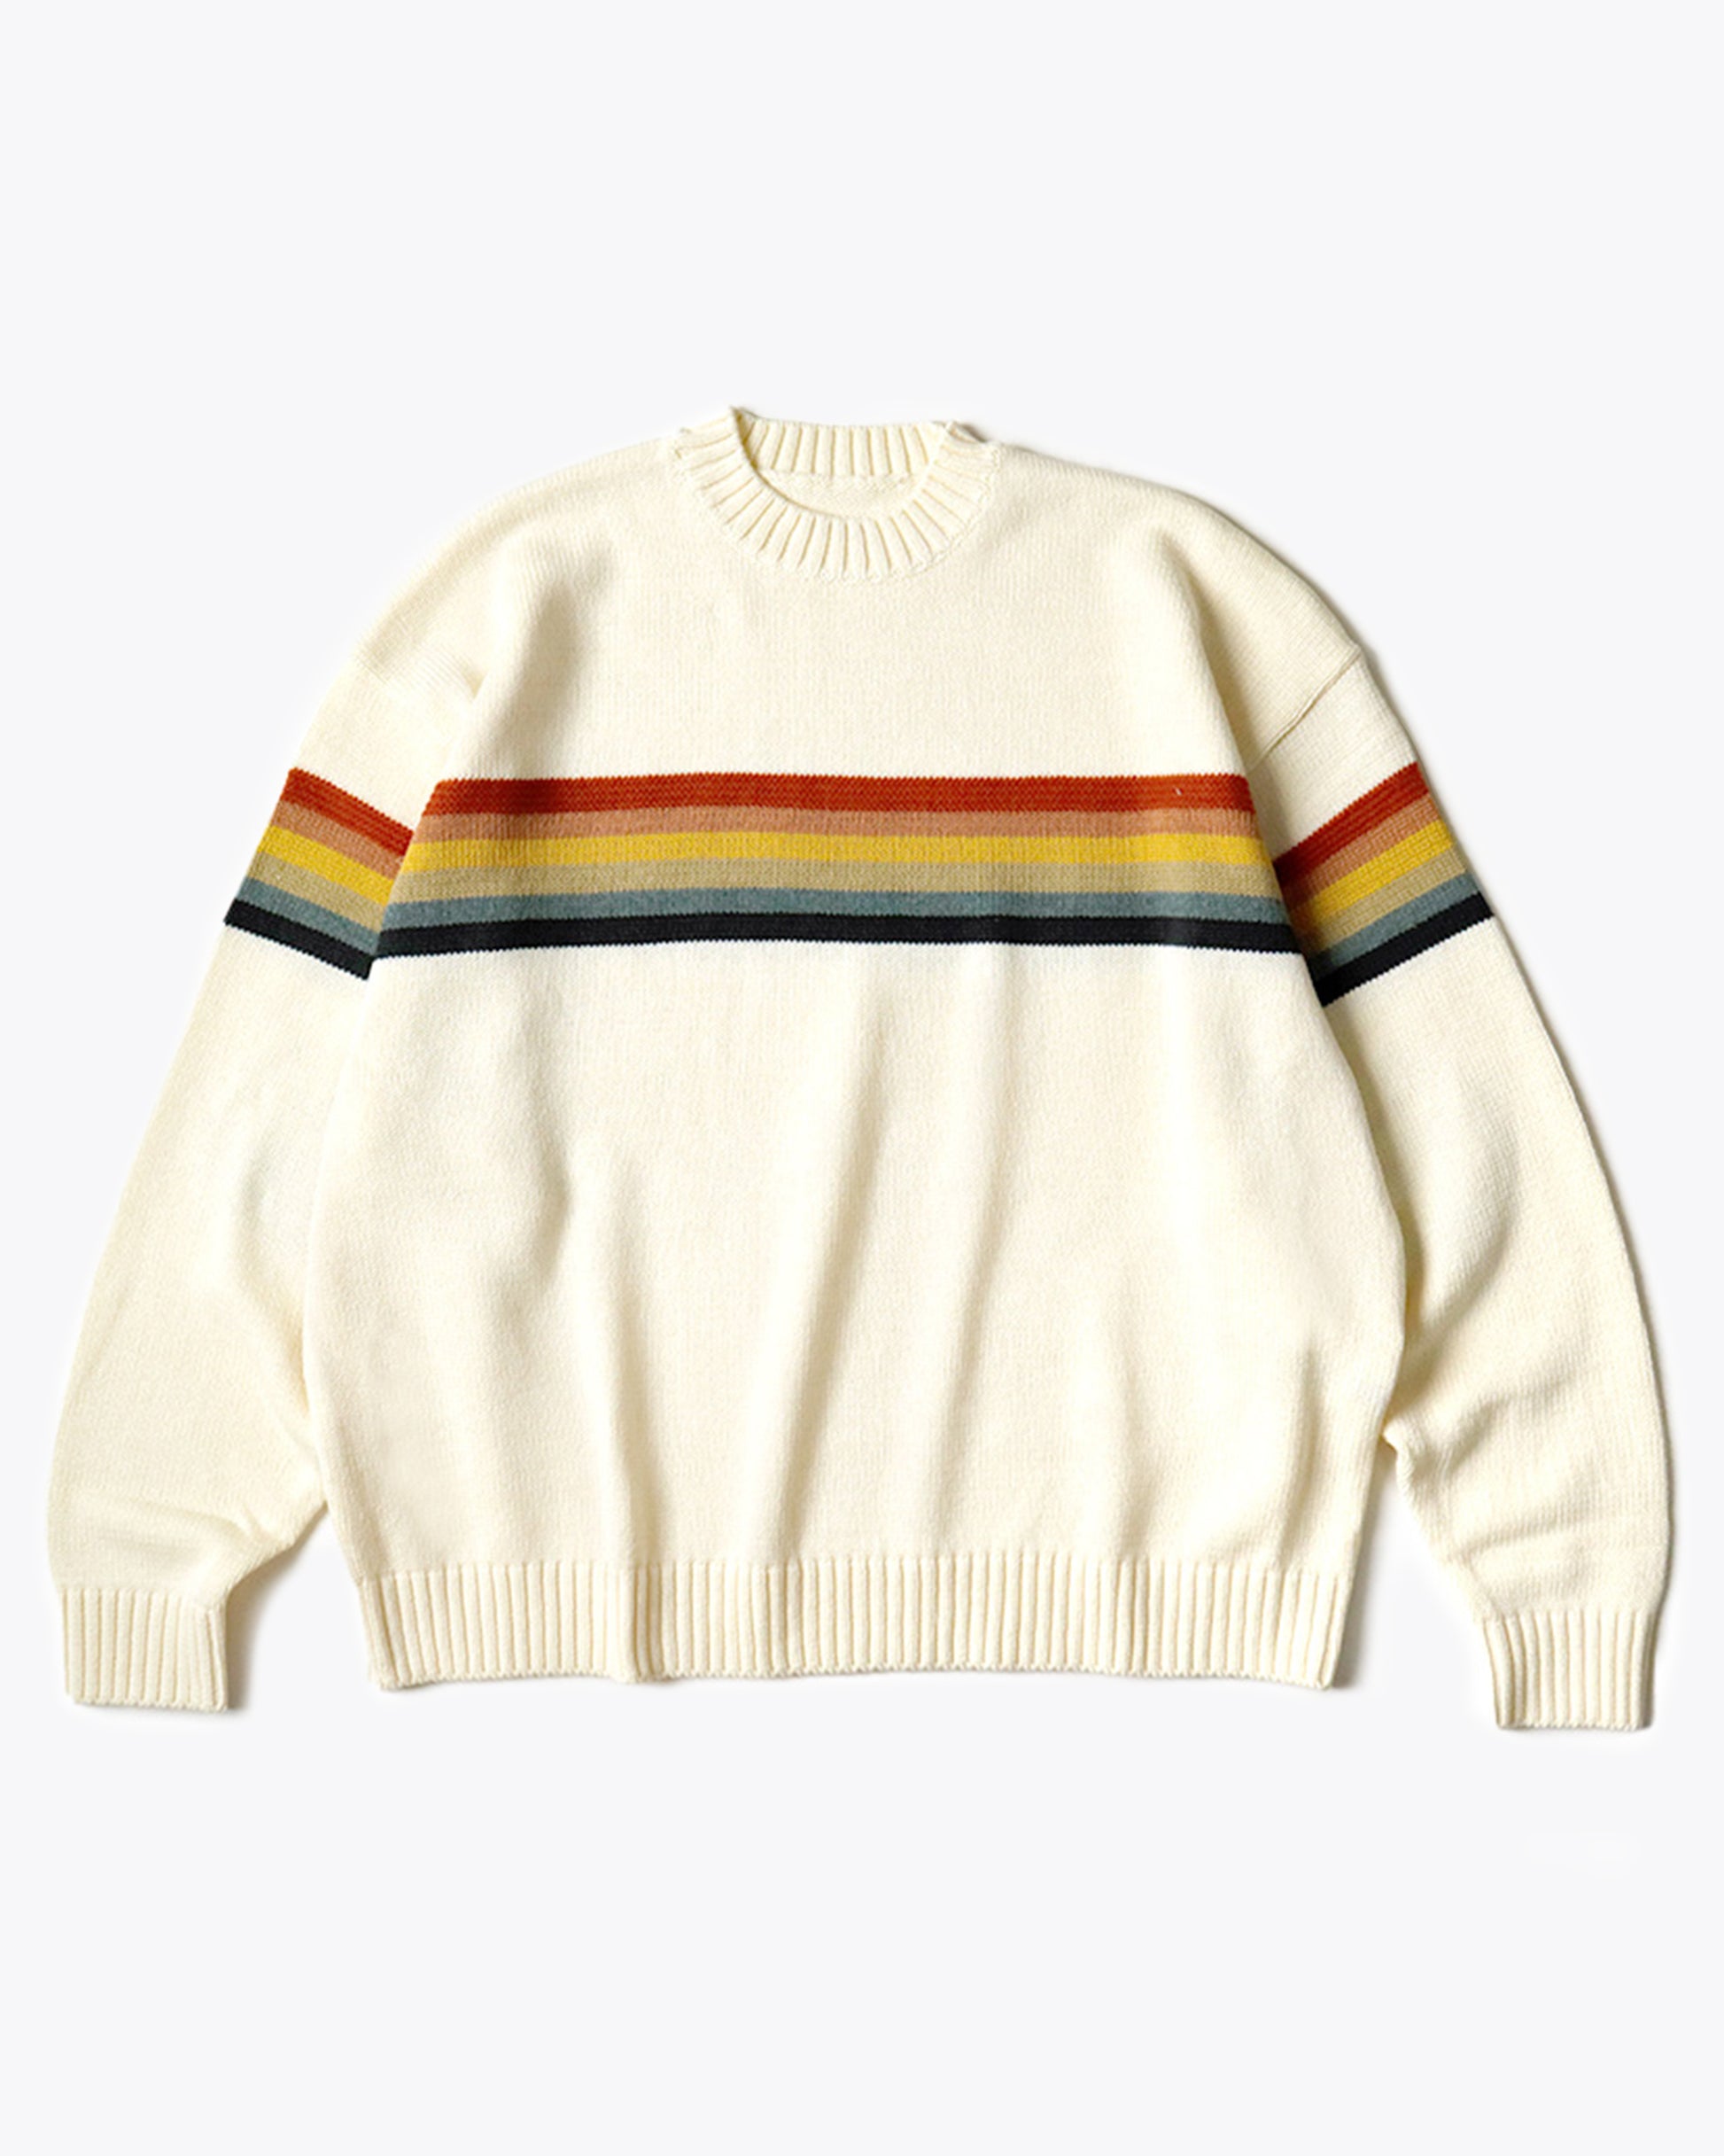 A 5g knit crewneck sweater with a rainbow stripe and smiley elbow patches